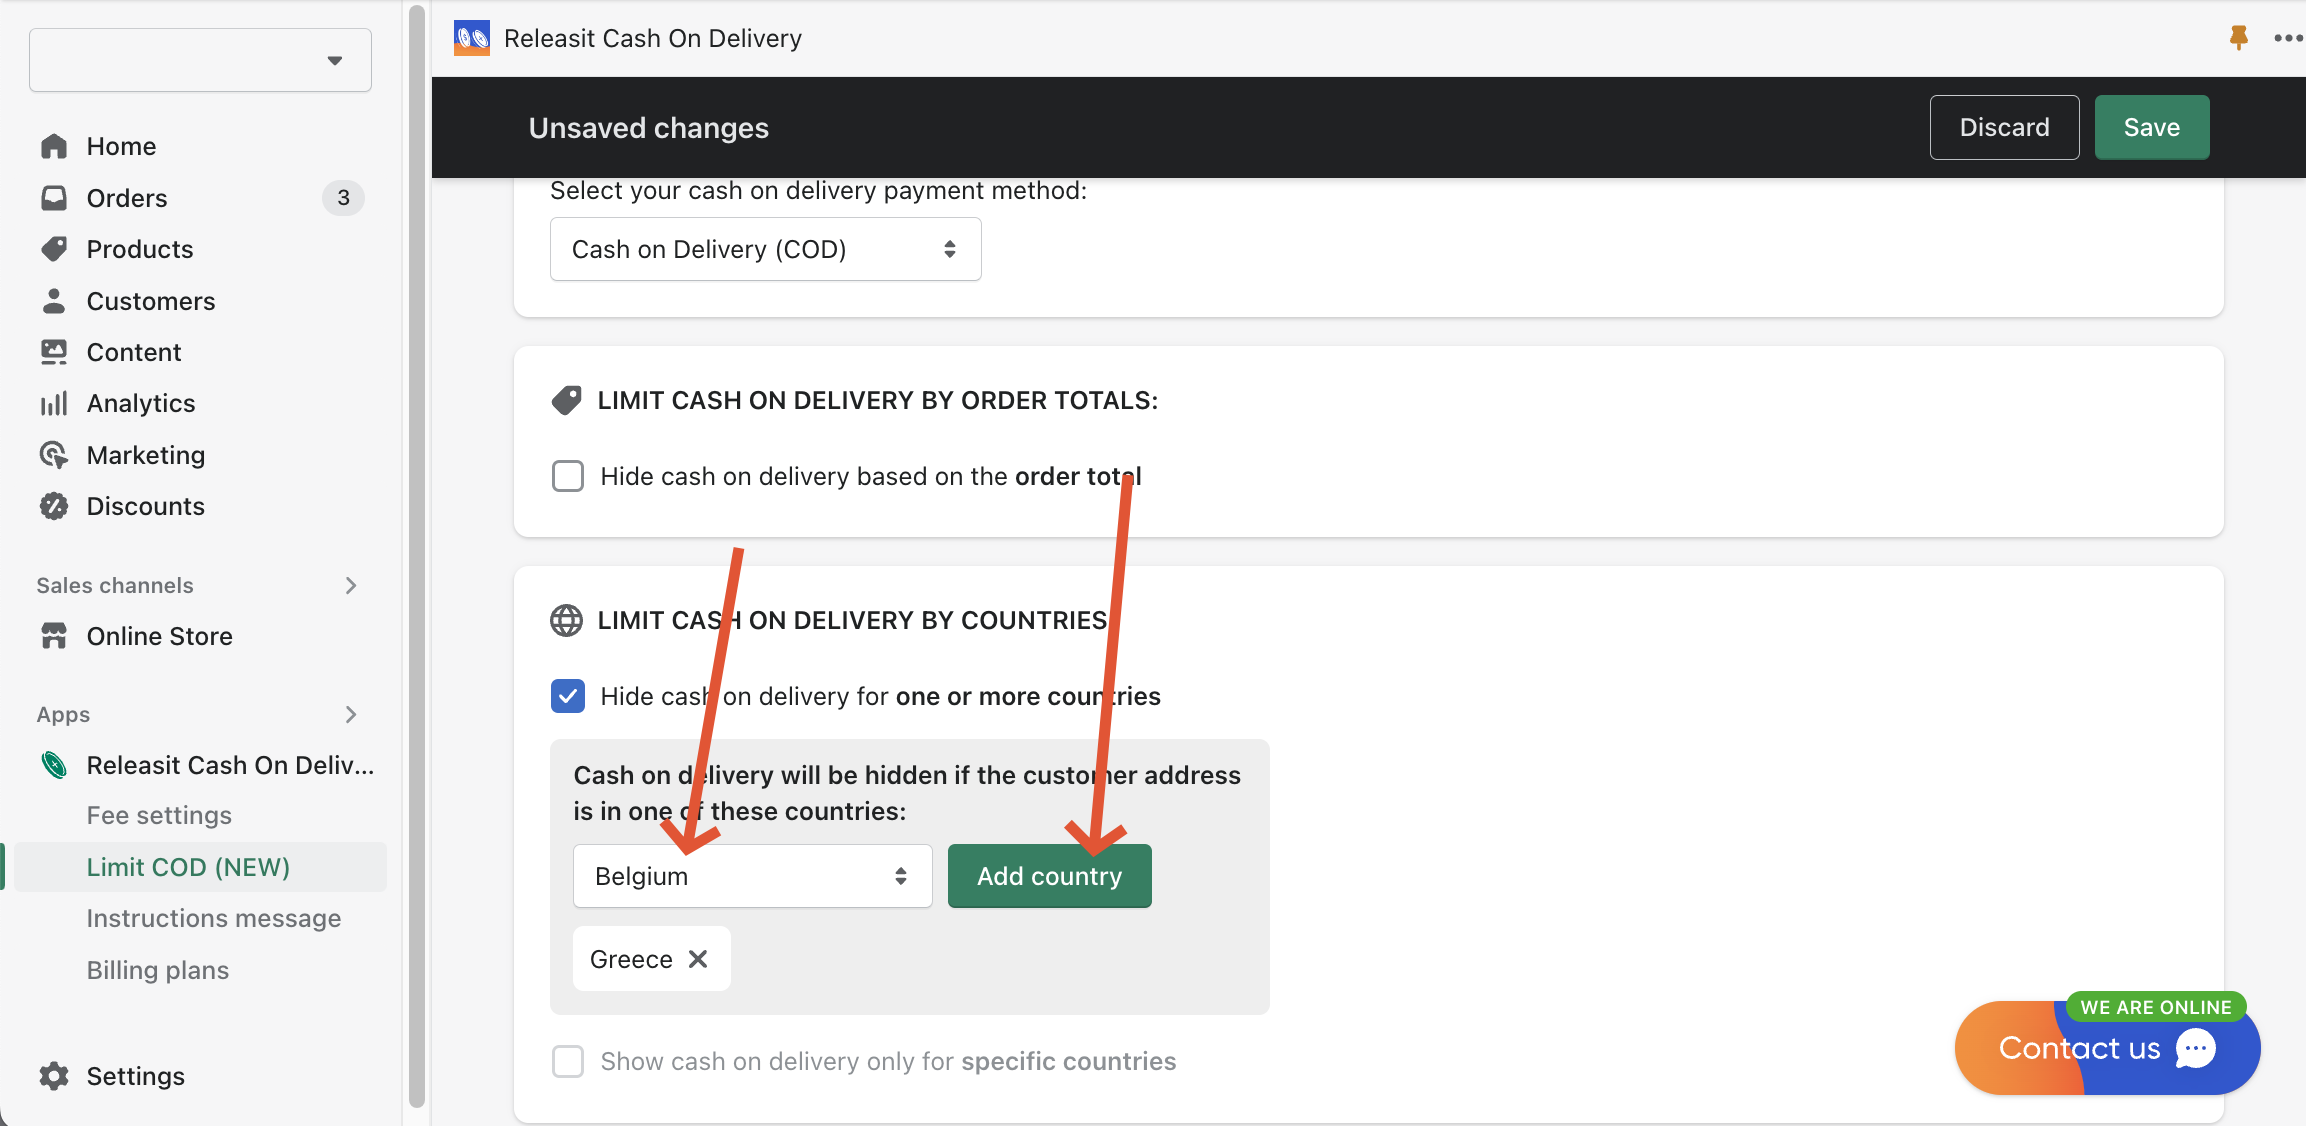 Releasit Cash On Delivery Limit COD page show selection of countries